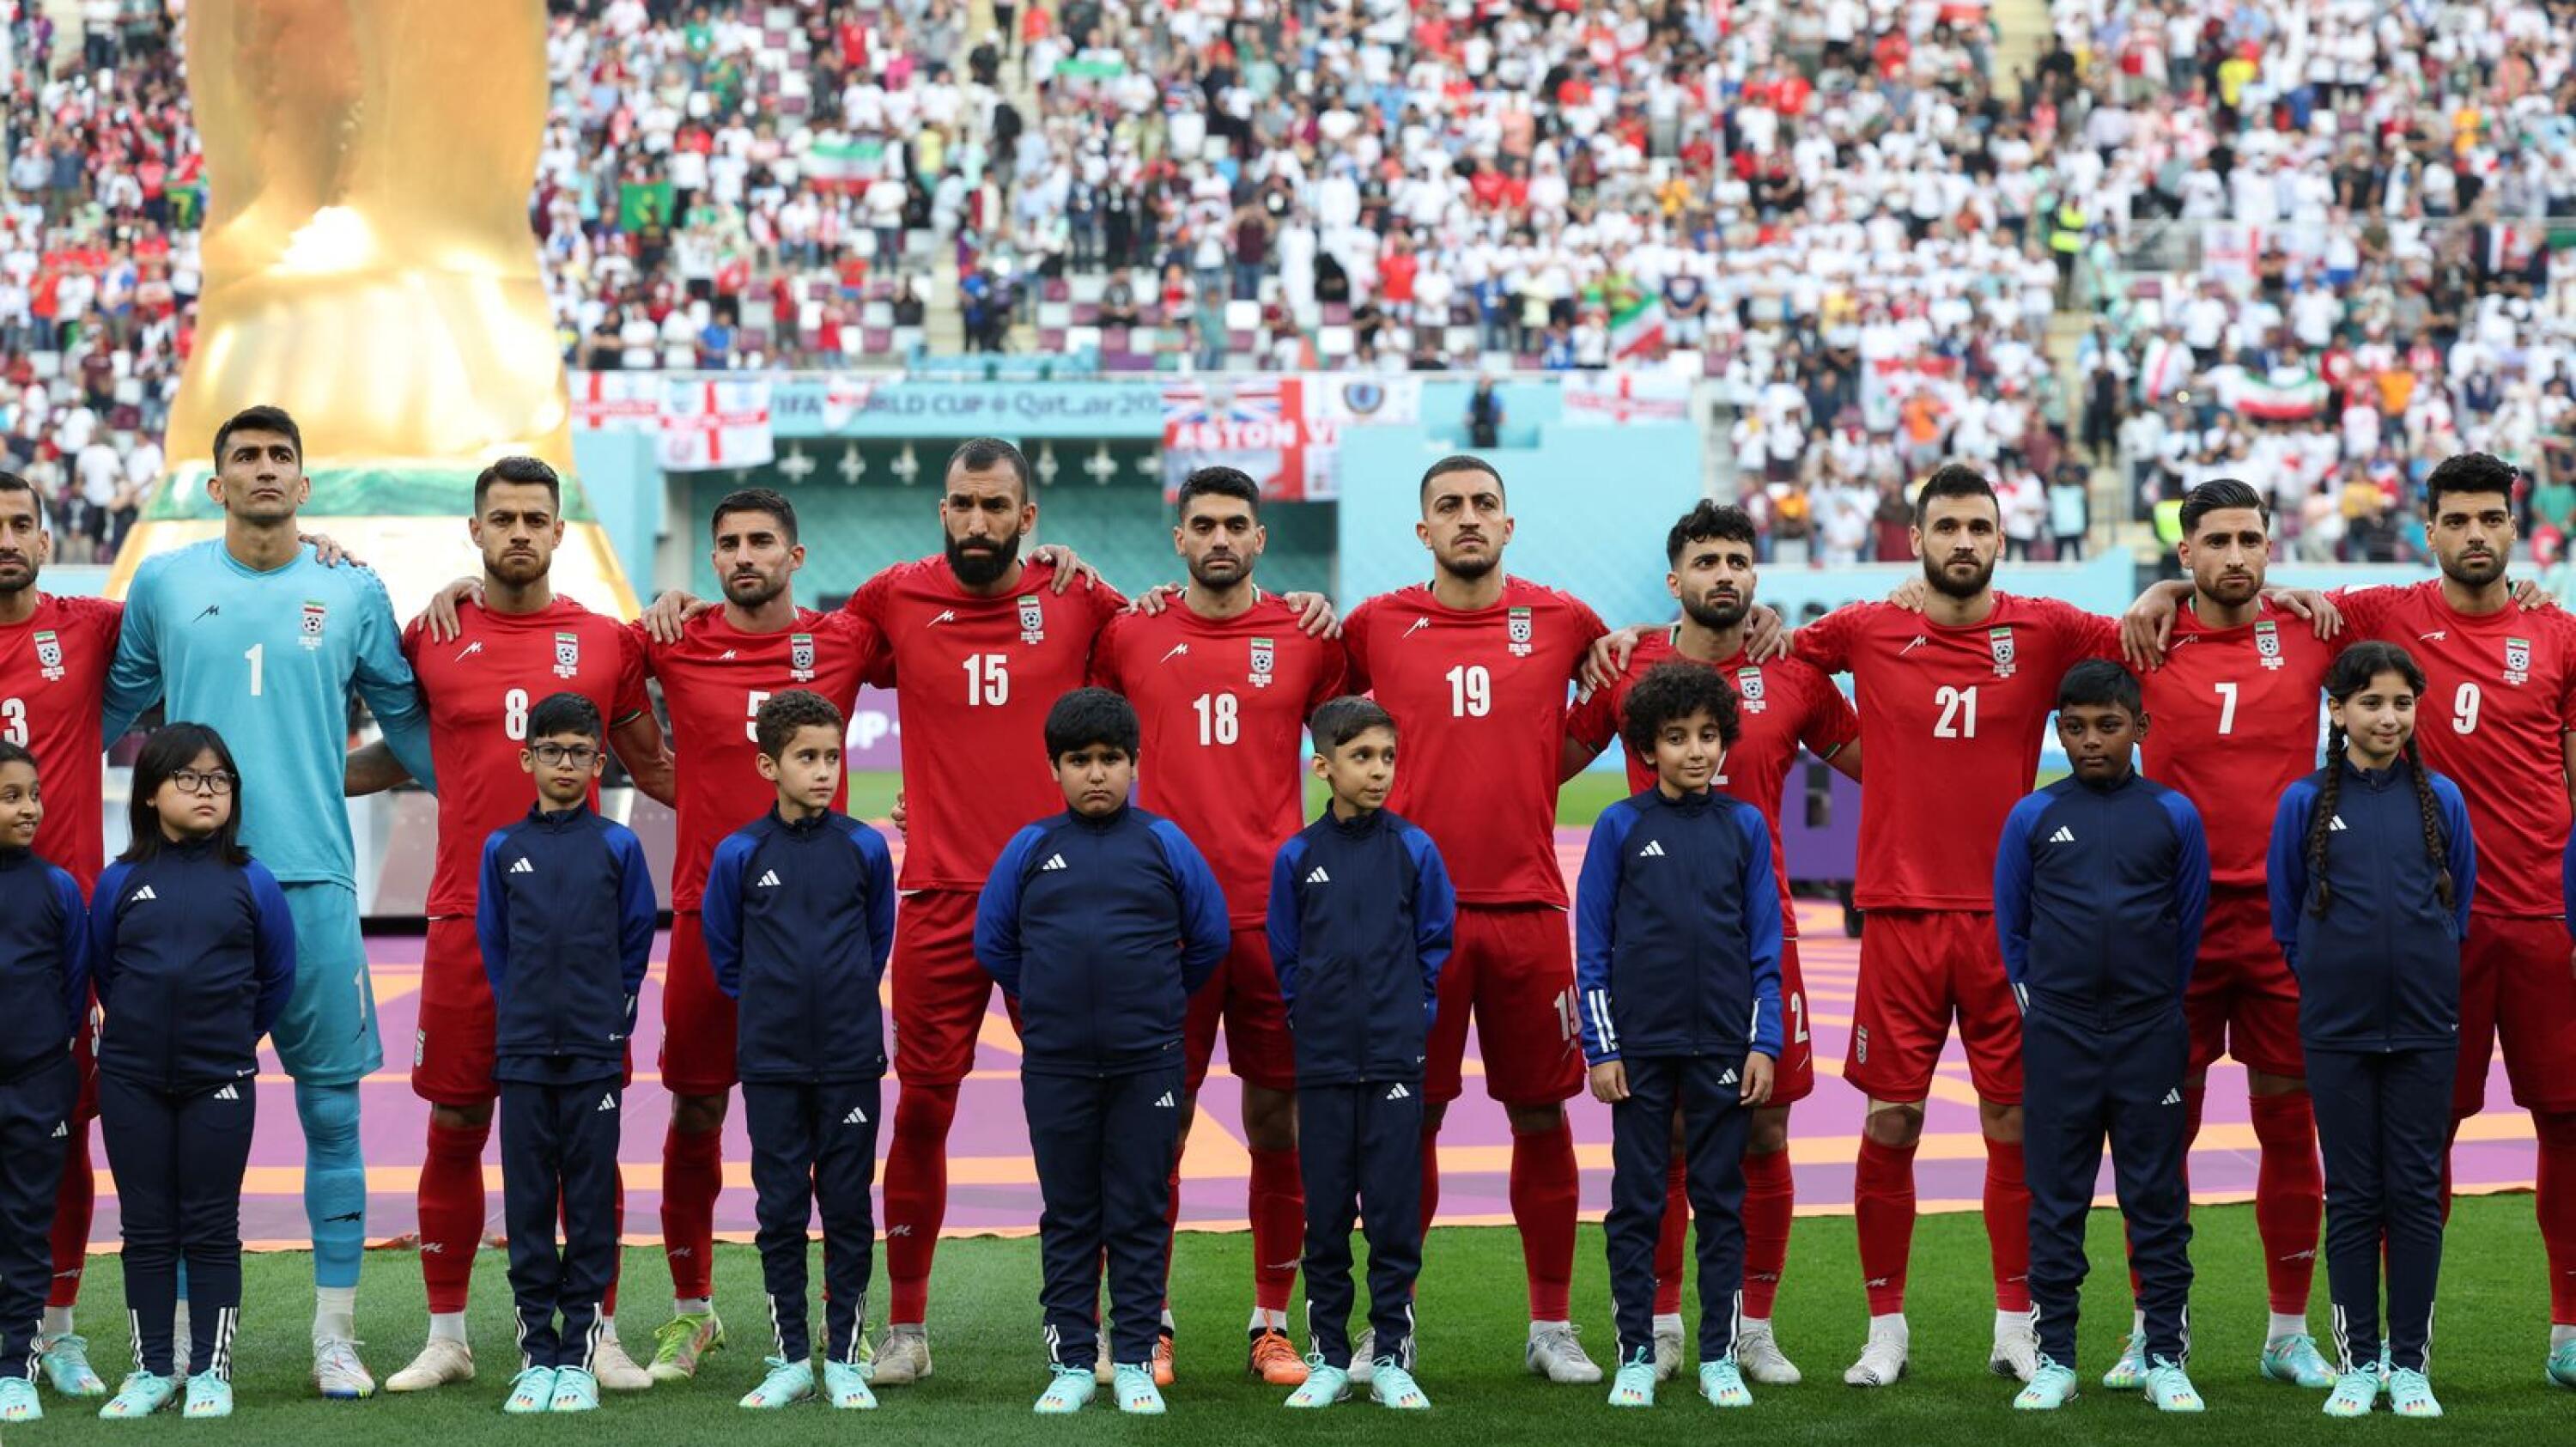 Iran players listen to their national anthem ahead of their match against England at the Khalifa International Stadium in Doha on Monday.